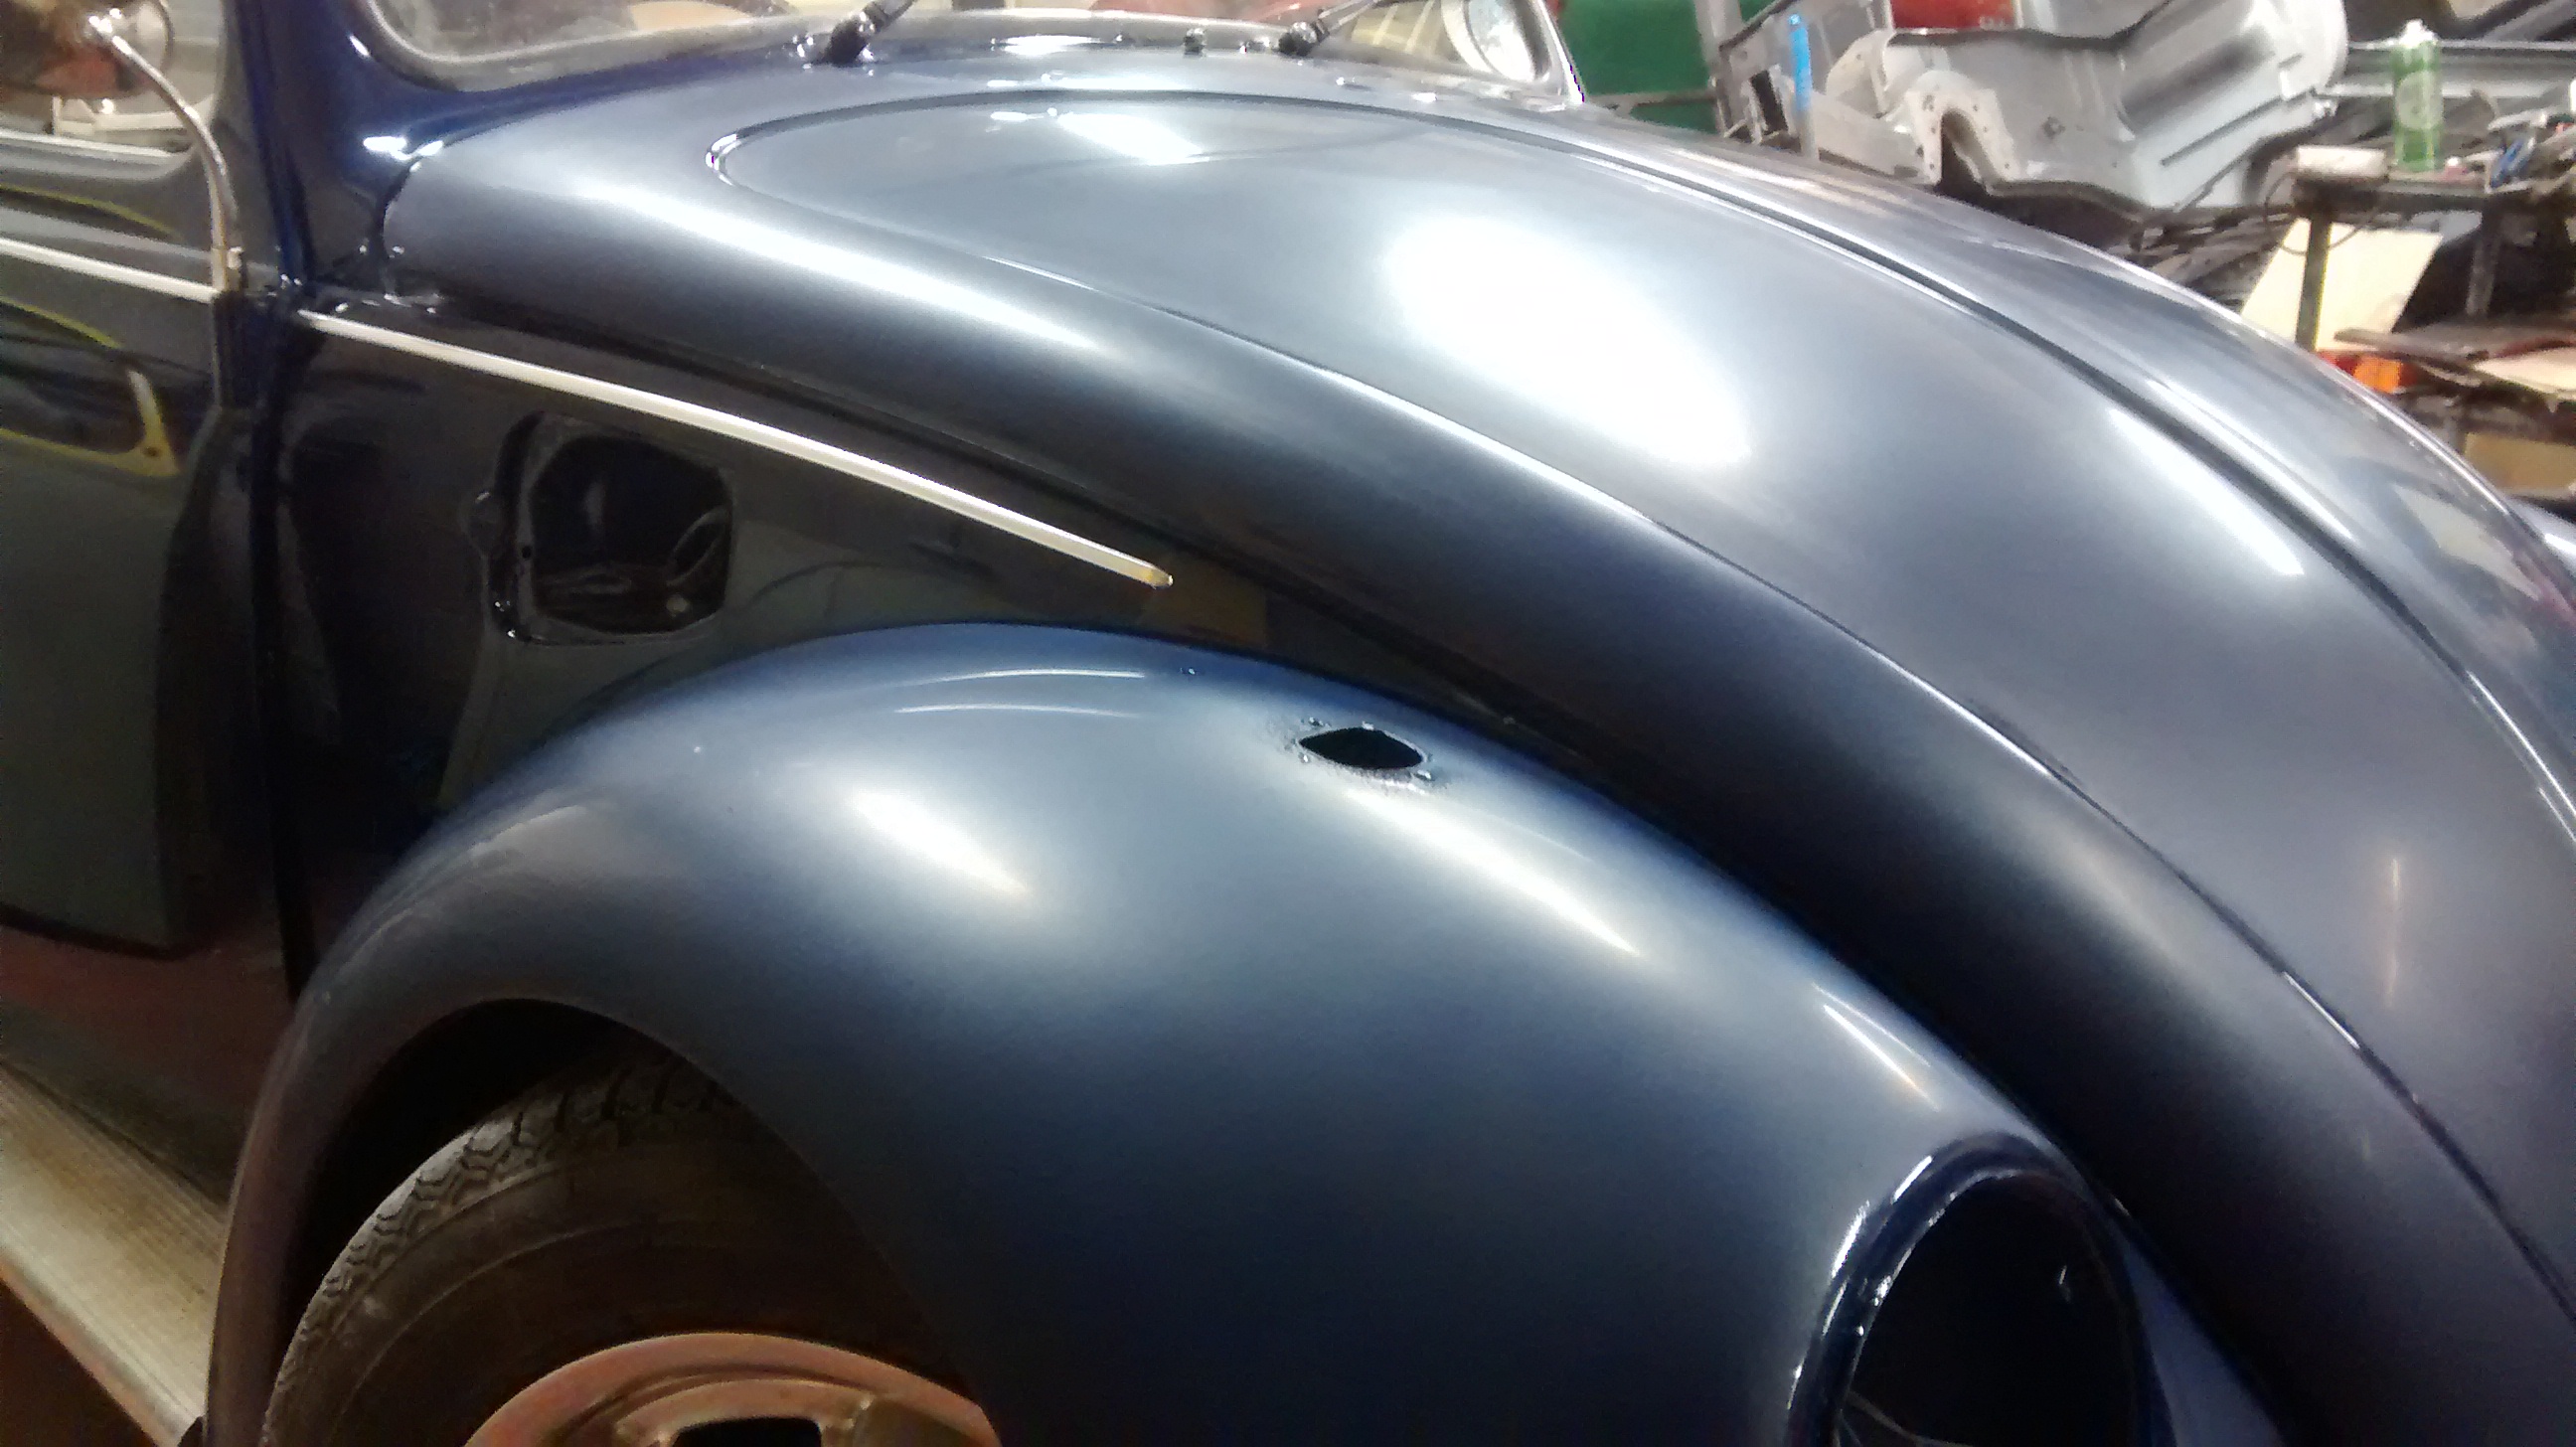 After paint we refitted the doors, bonnet and wings. The doors and quarters have been flatted and polished here, with the wings and bonnet flatted ready for a machine polish